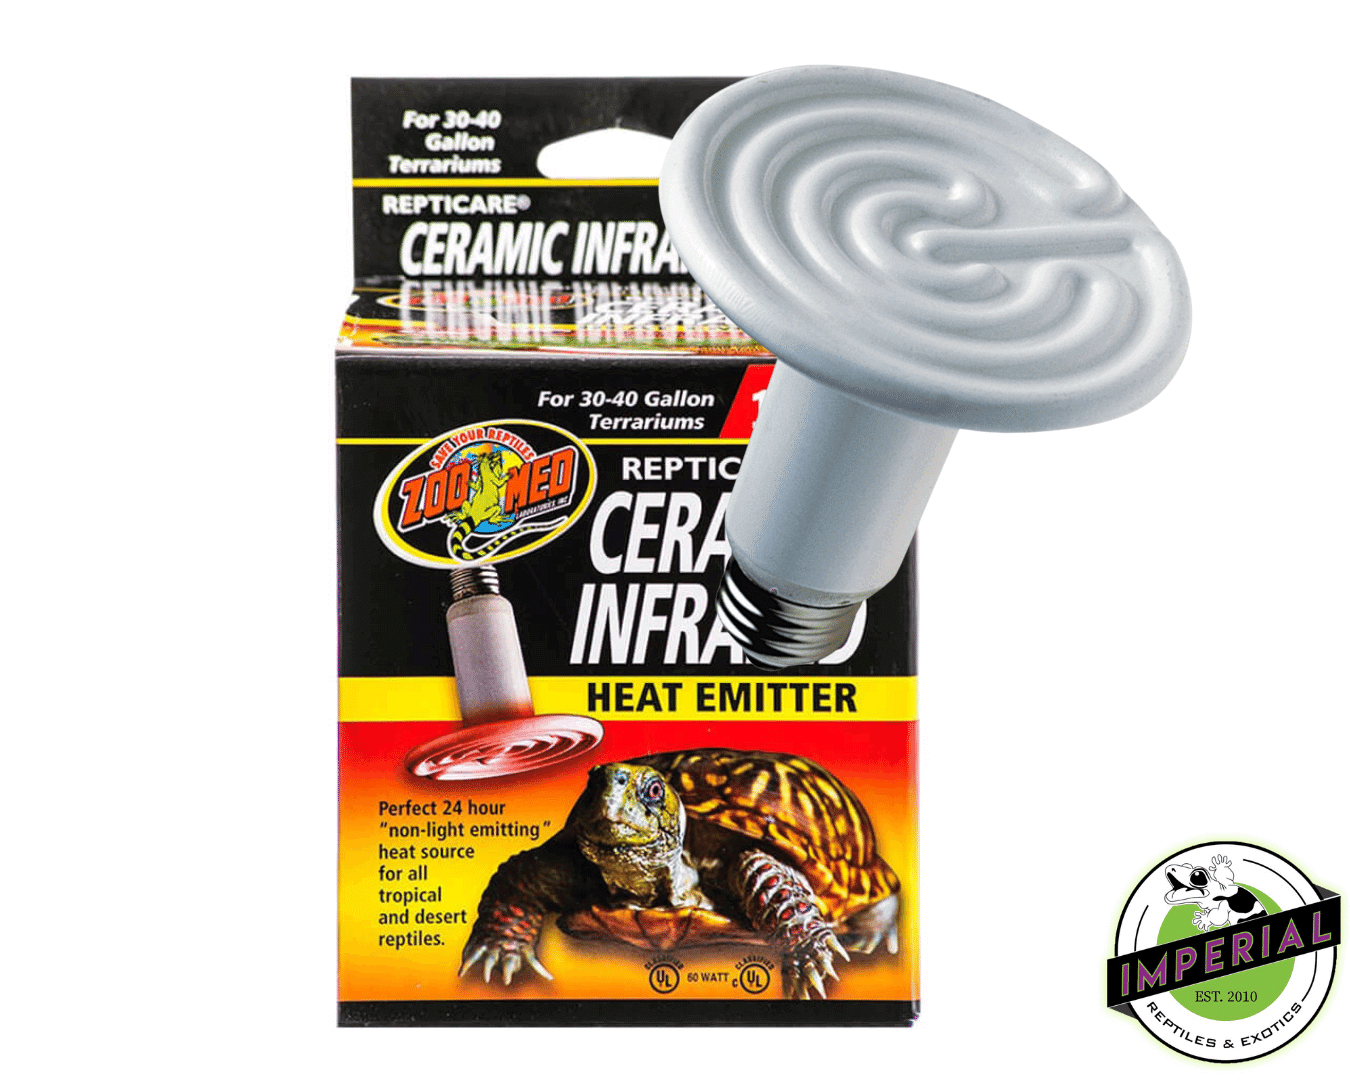 ceramic infrared heat emitter for sale online, buy cheap reptile supplies near me